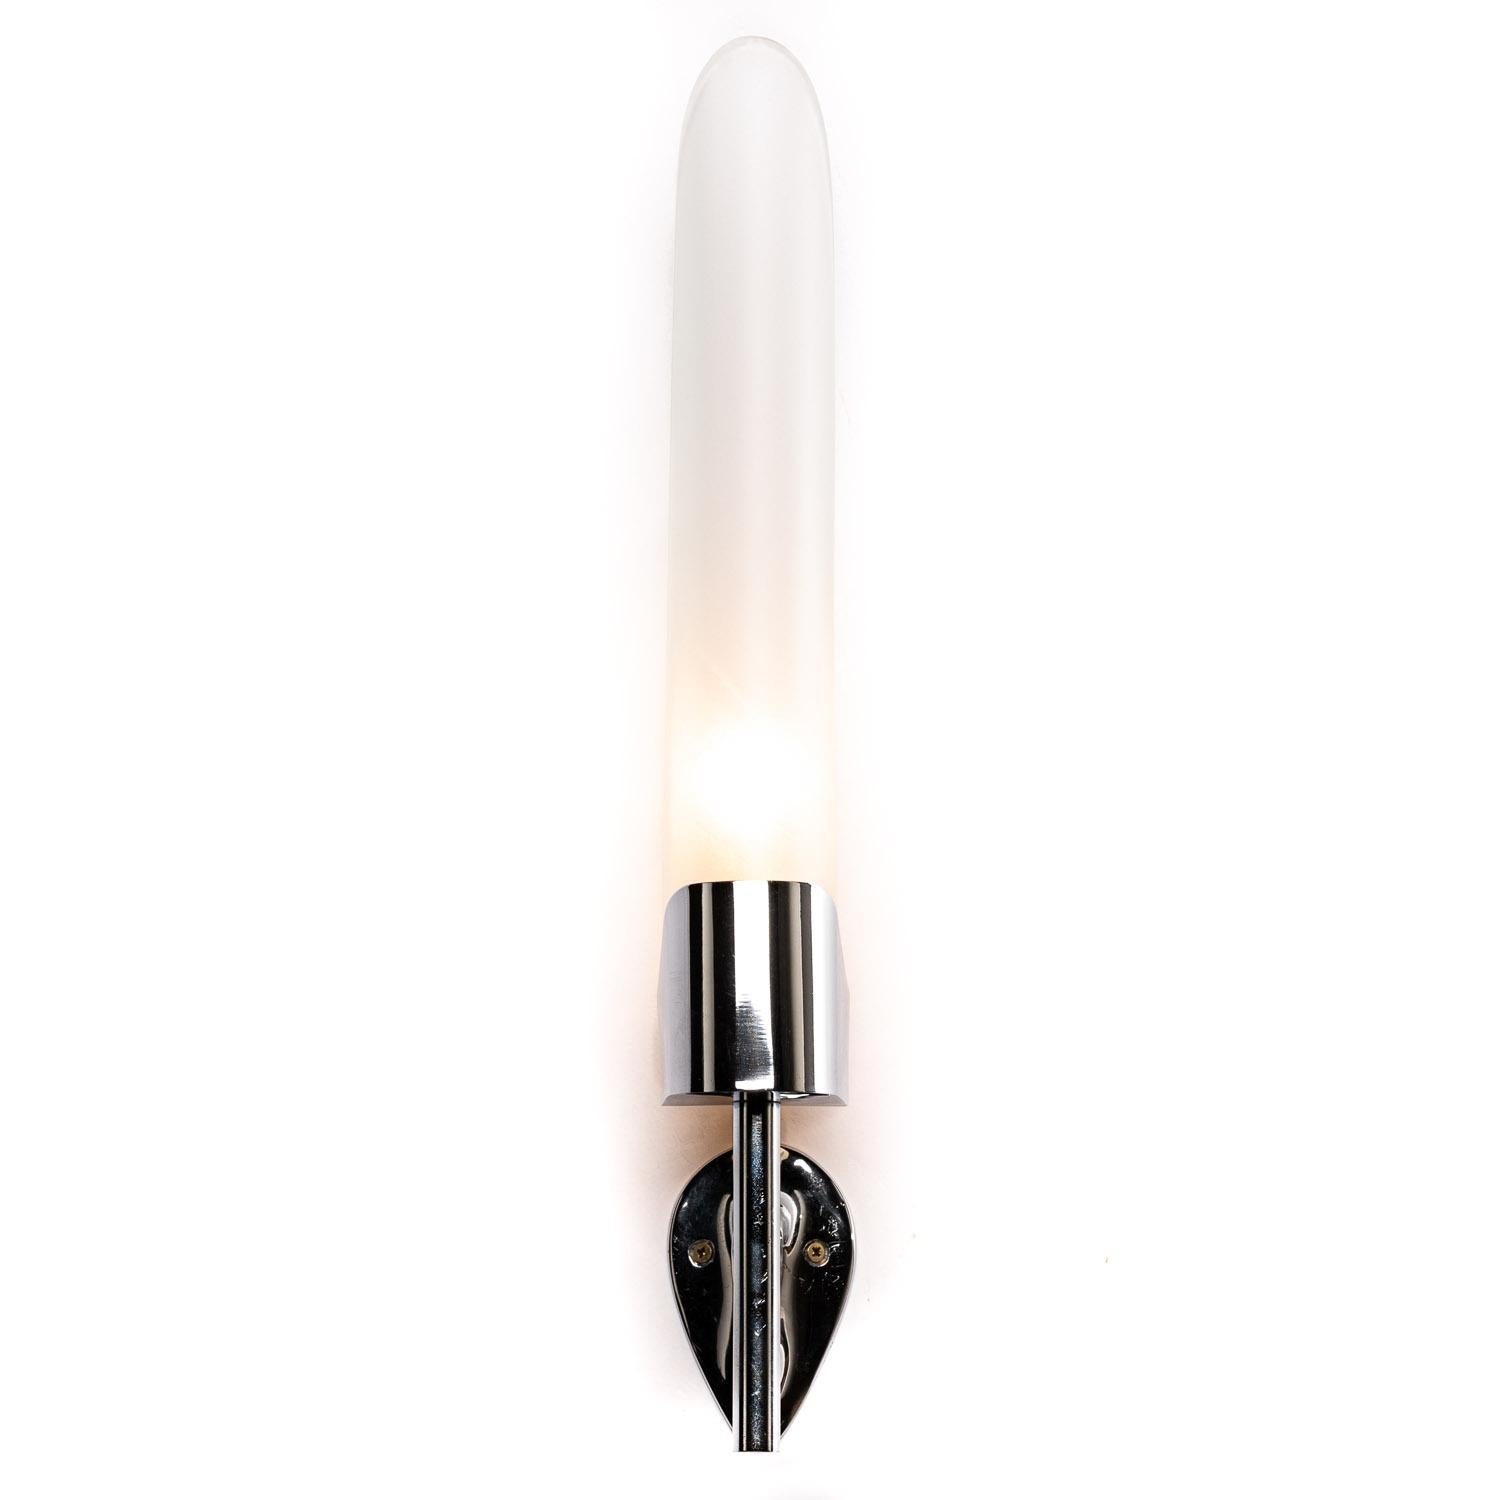 If you like sleek lighting then you will love this pair of Max Ingrand glass sconces. Designed to remind you of candle-lights with frosted bent glass reflector and chrome-plated wall arm, it's a highly distinctive piece and looks stunning when